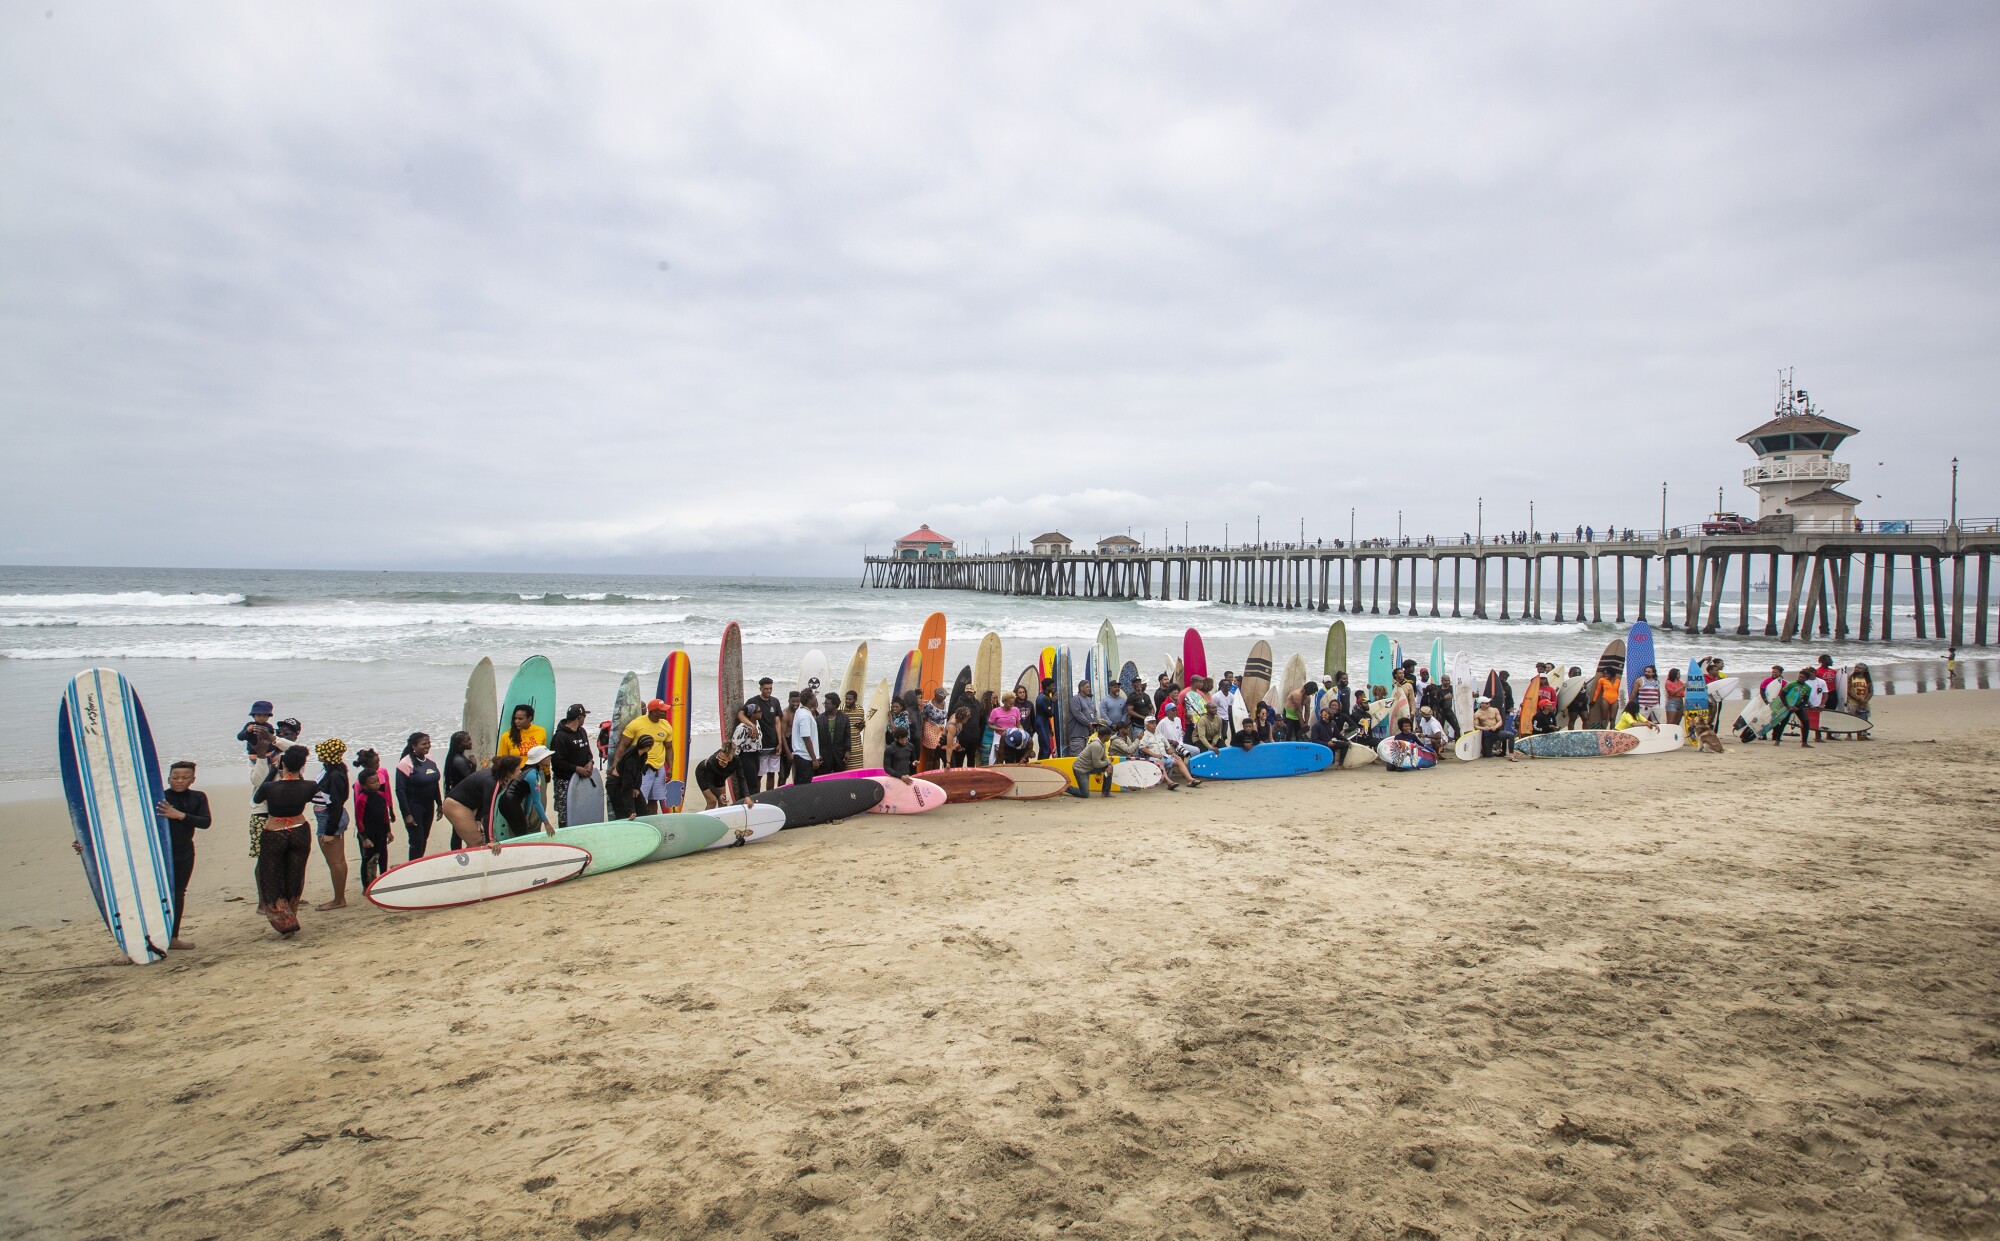 People with surfboards line up for a photo.